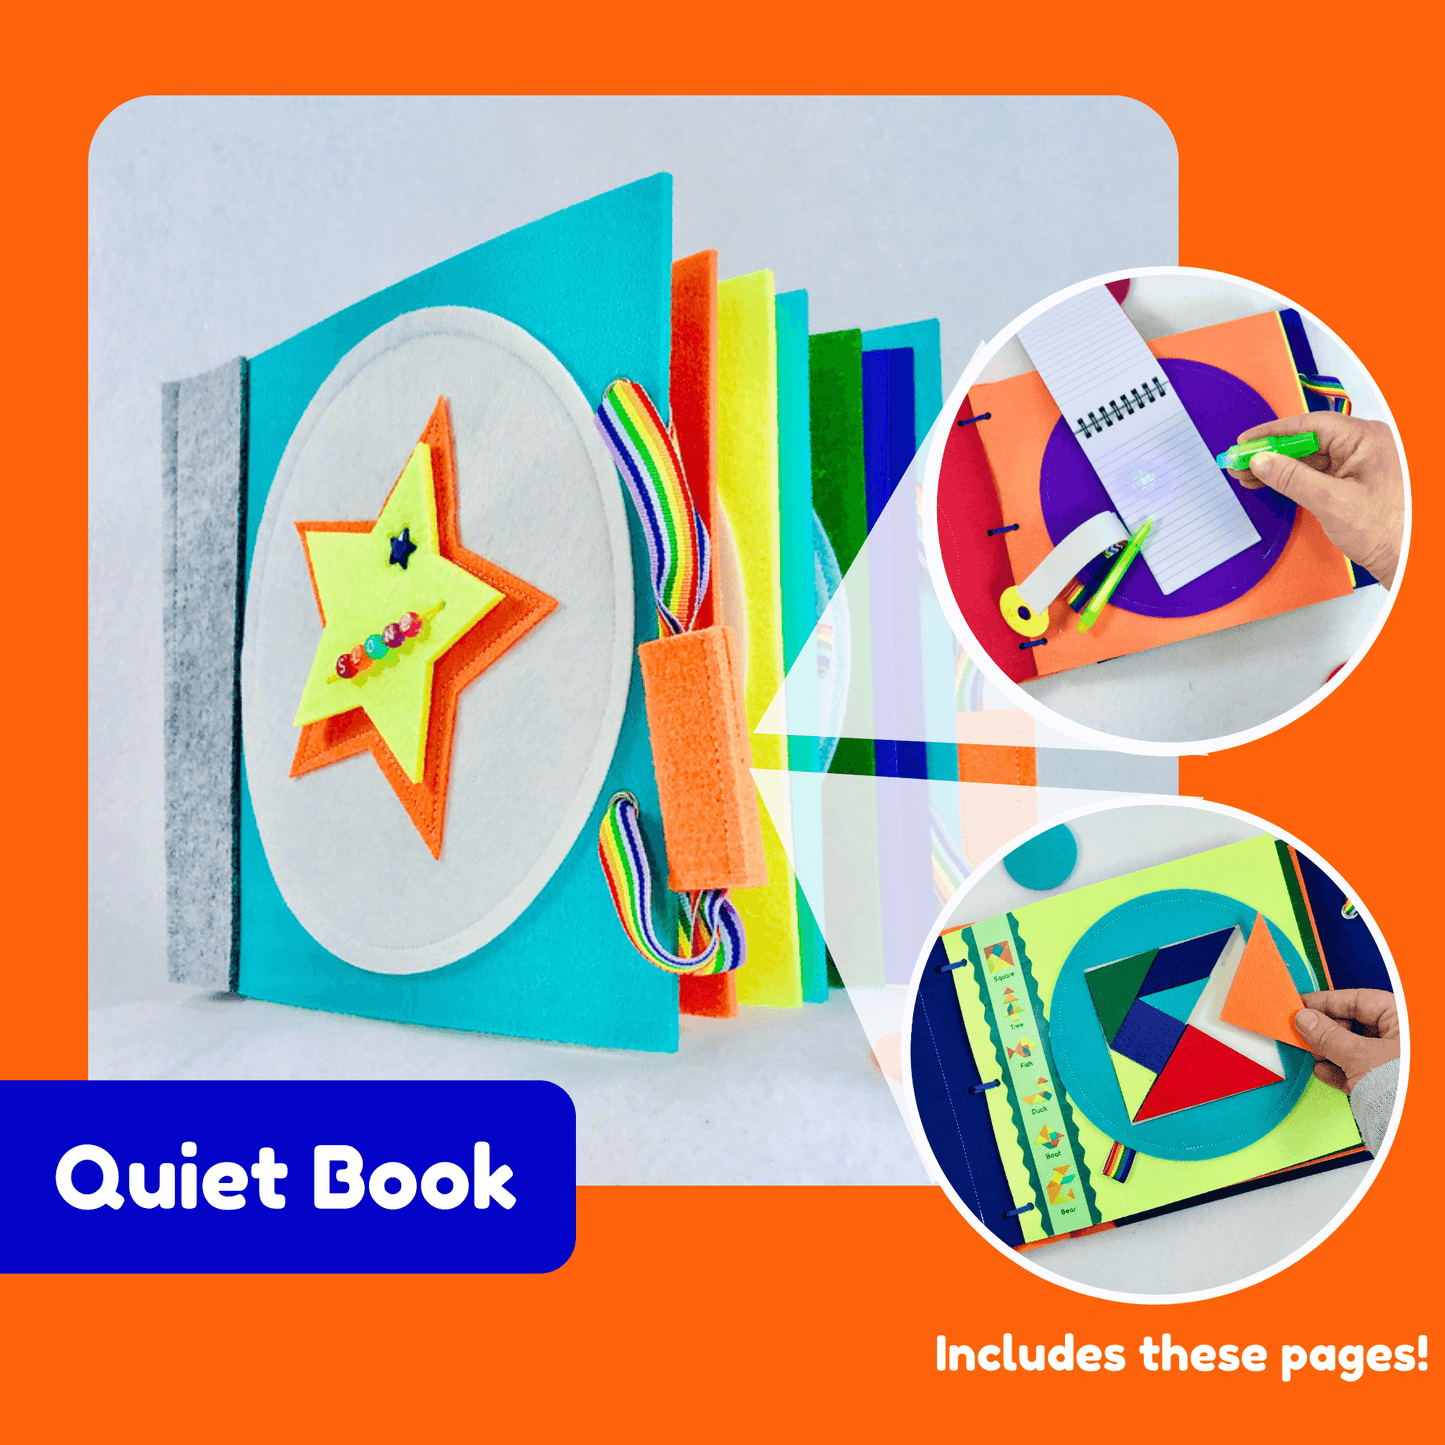 Spy Pen and Notebook Quiet Book Page - tinyfeats